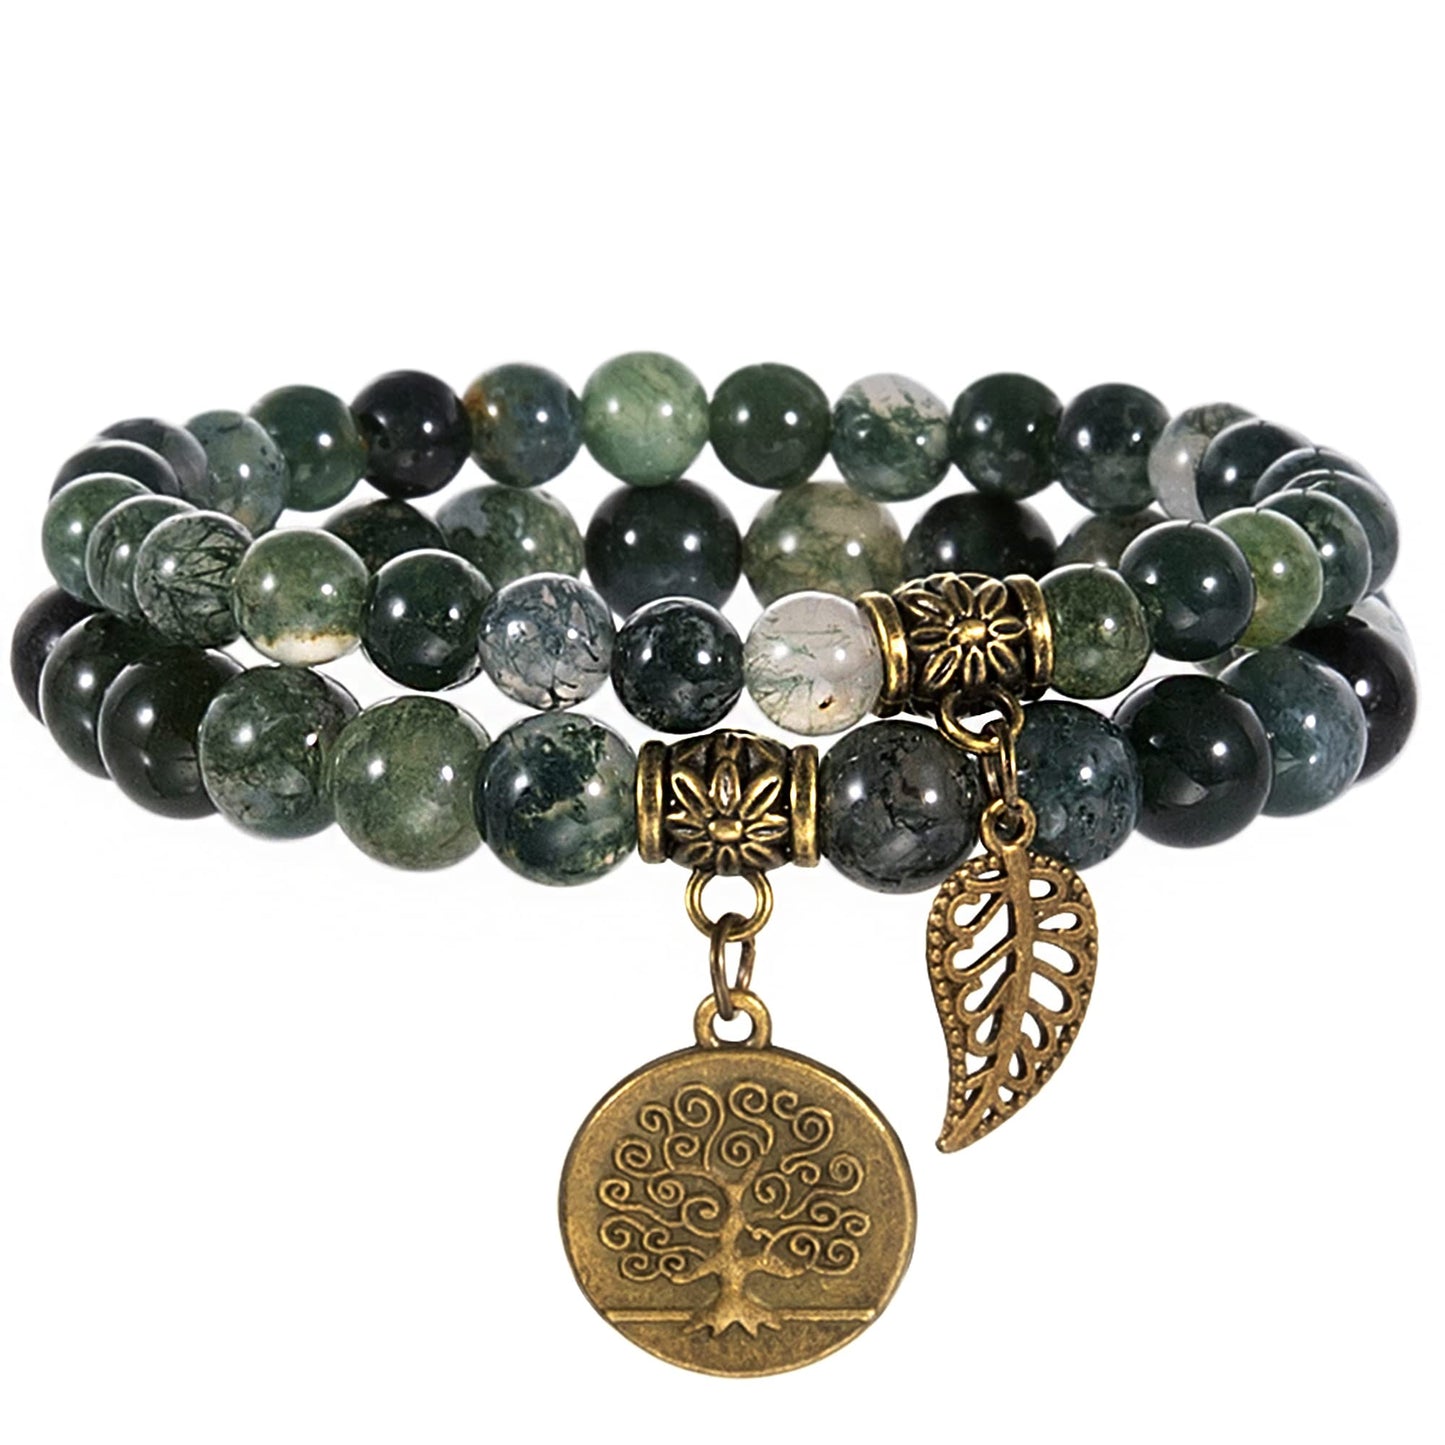 Moss Agate Healing Crystal Bracelet-Calming - ourlovejewelry